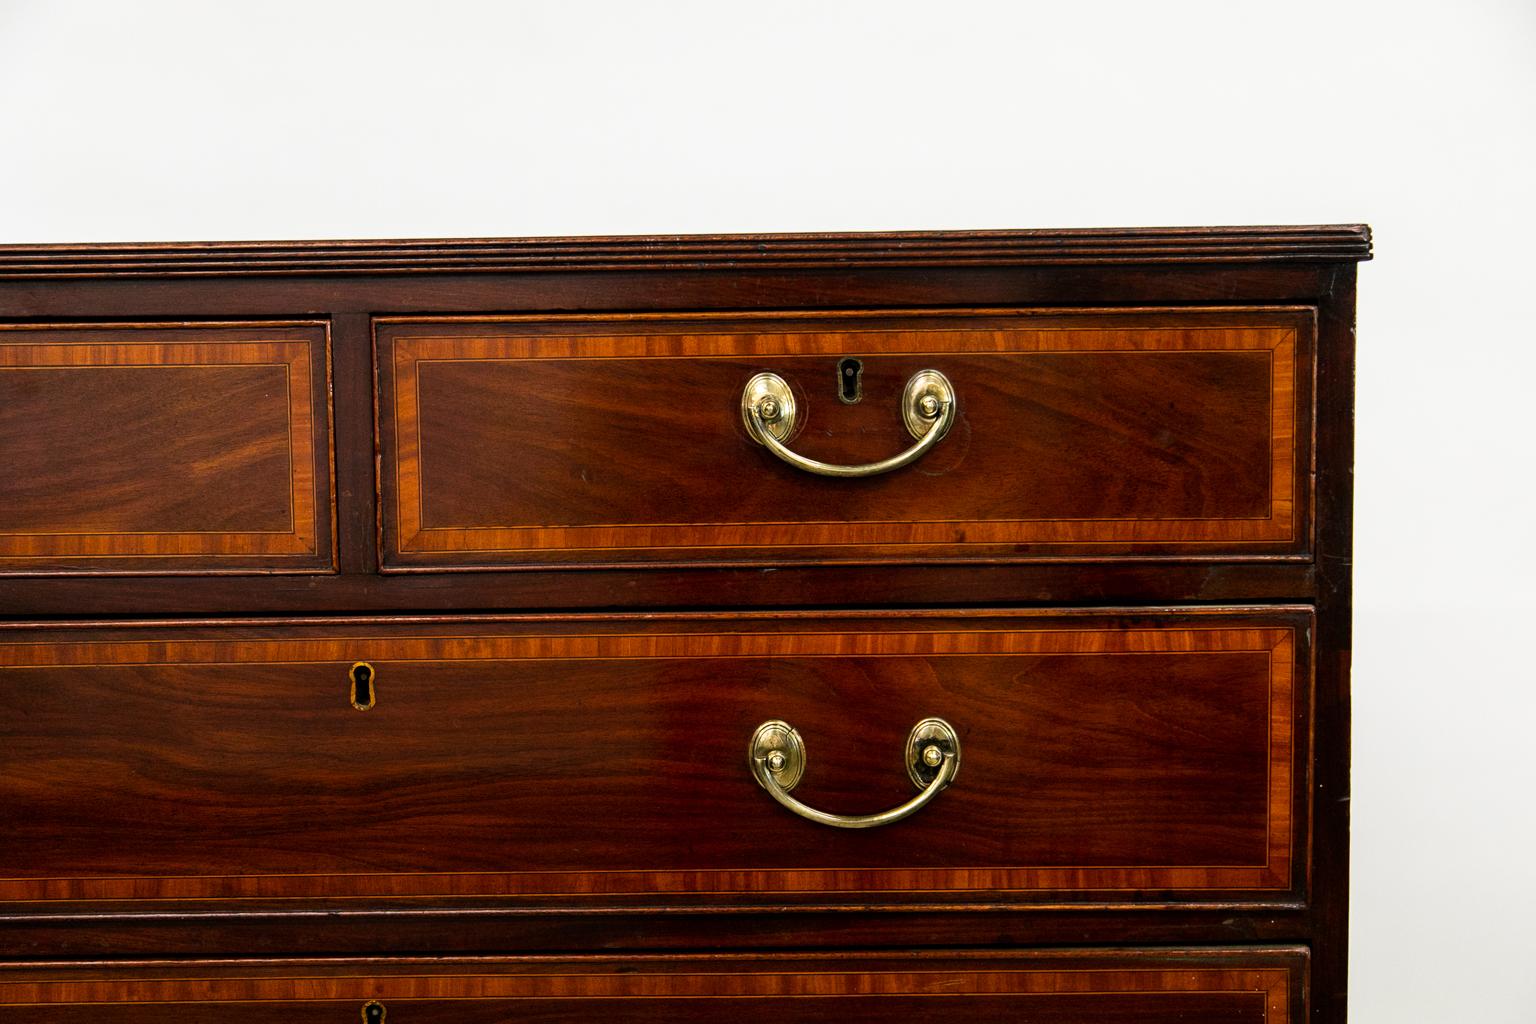 The top and drawer fronts of this chest are inlaid with a band of bee's wing satinwood framed by ebony and boxwood lines. There are two indentations in the surface of the front right corner.